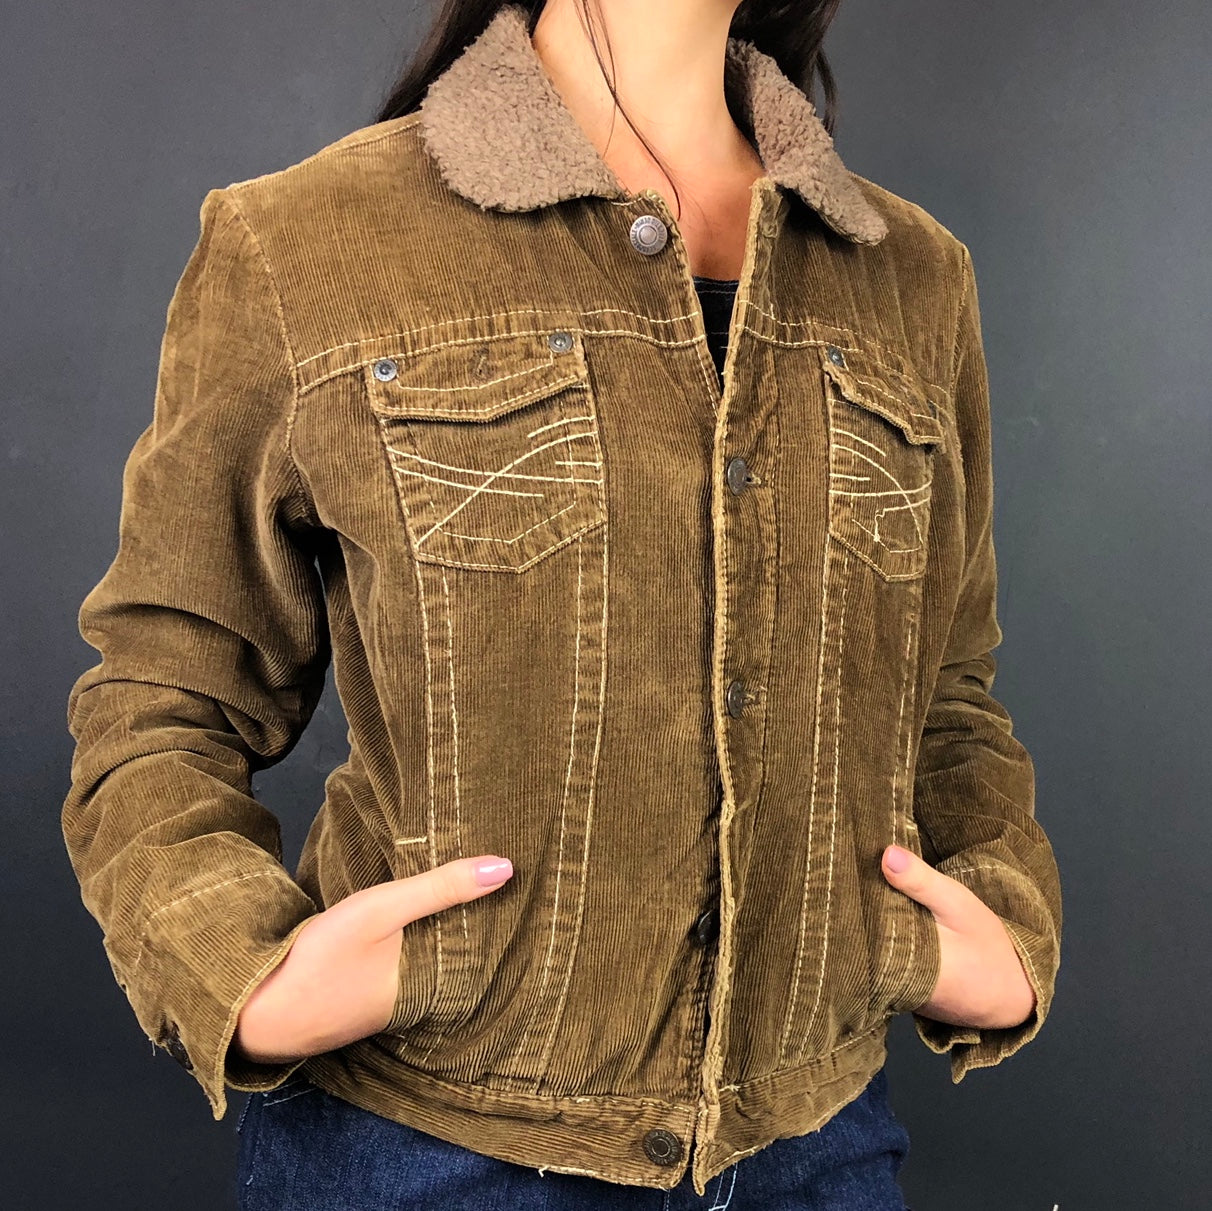 Super Cool 70’s Inspired Corduroy Jacket - Women's Small